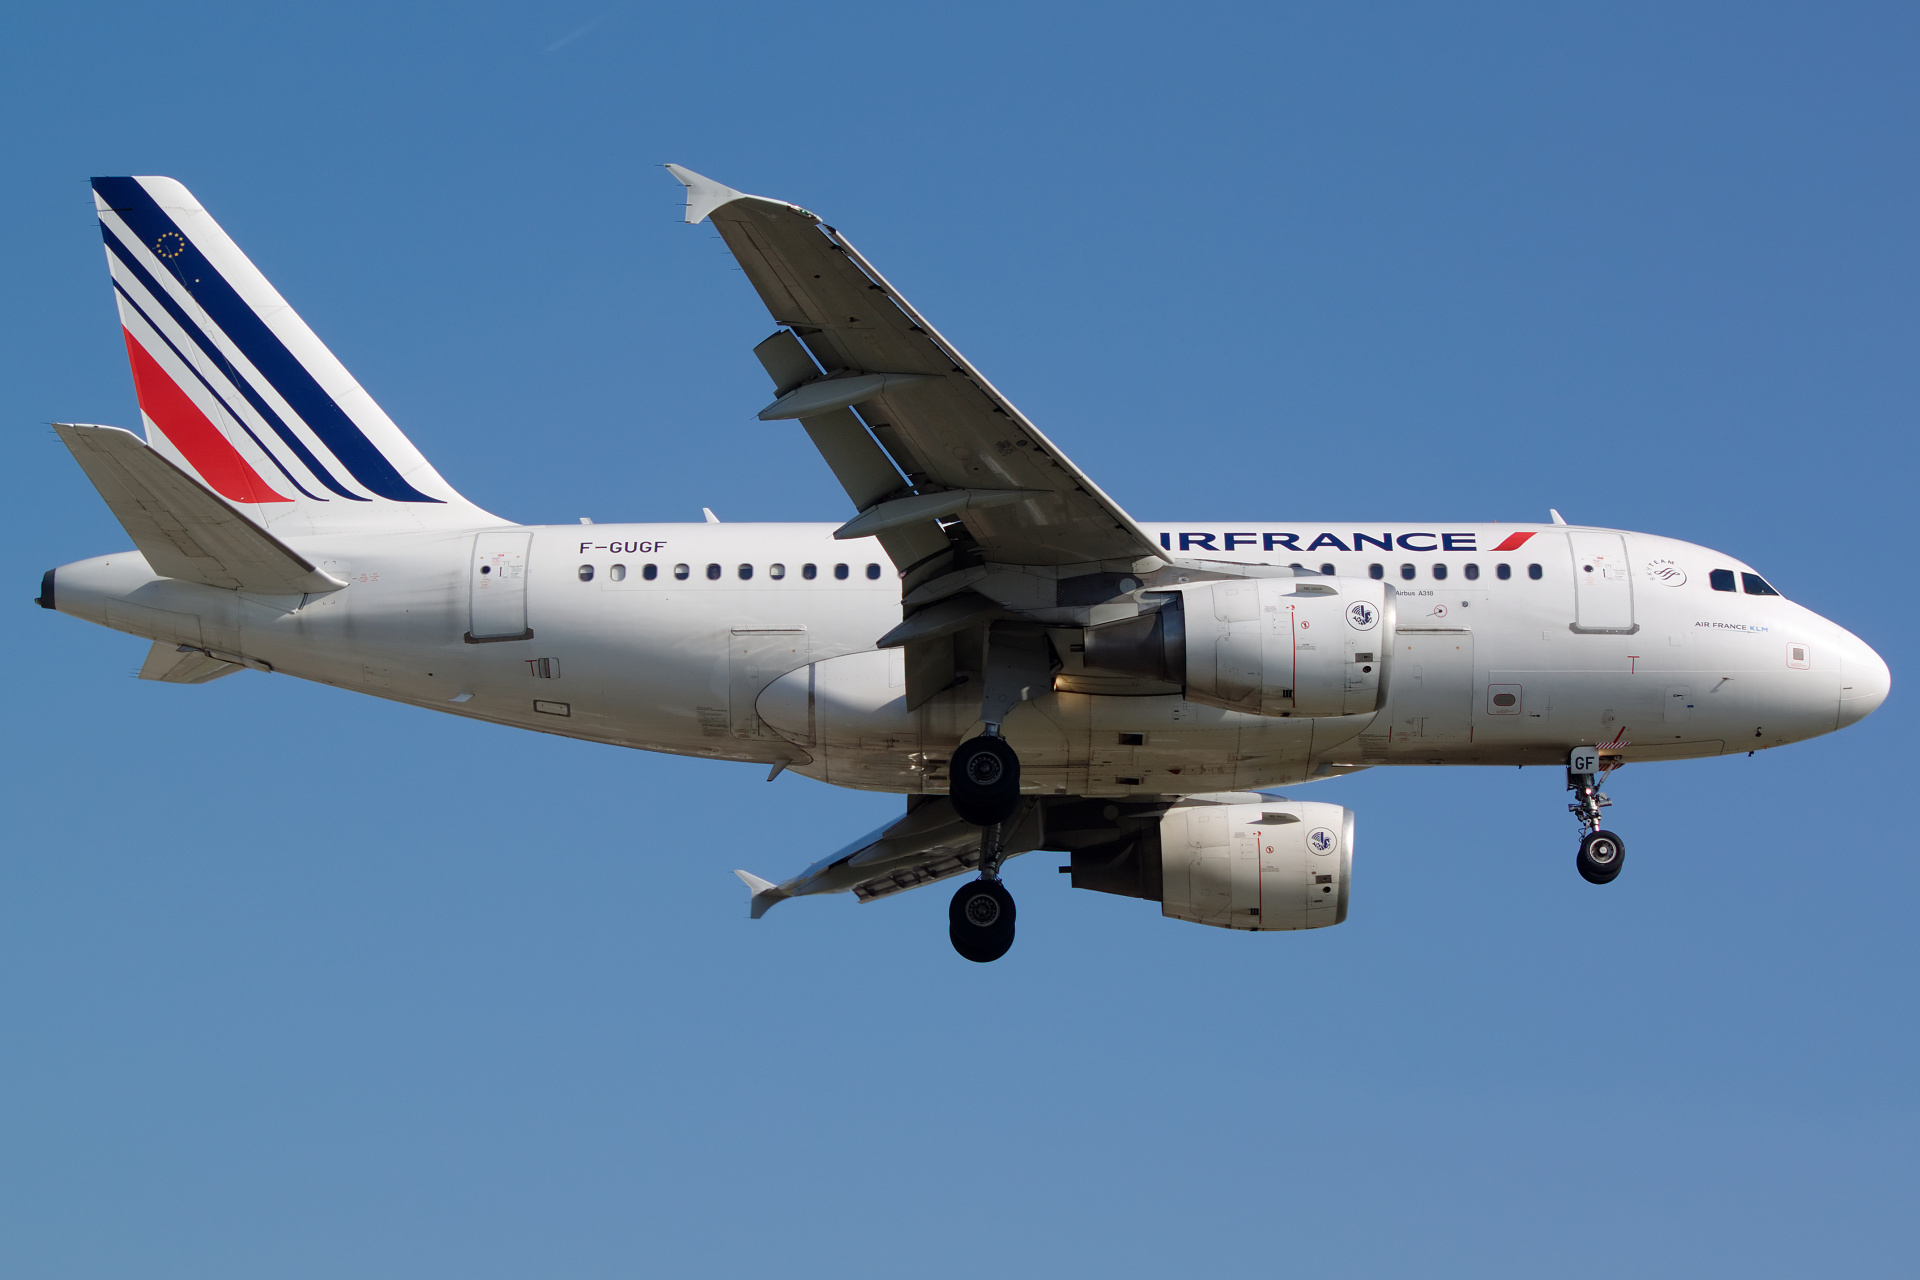 F-GUGF (Aircraft » EPWA Spotting » Airbus A318-100 » Air France)